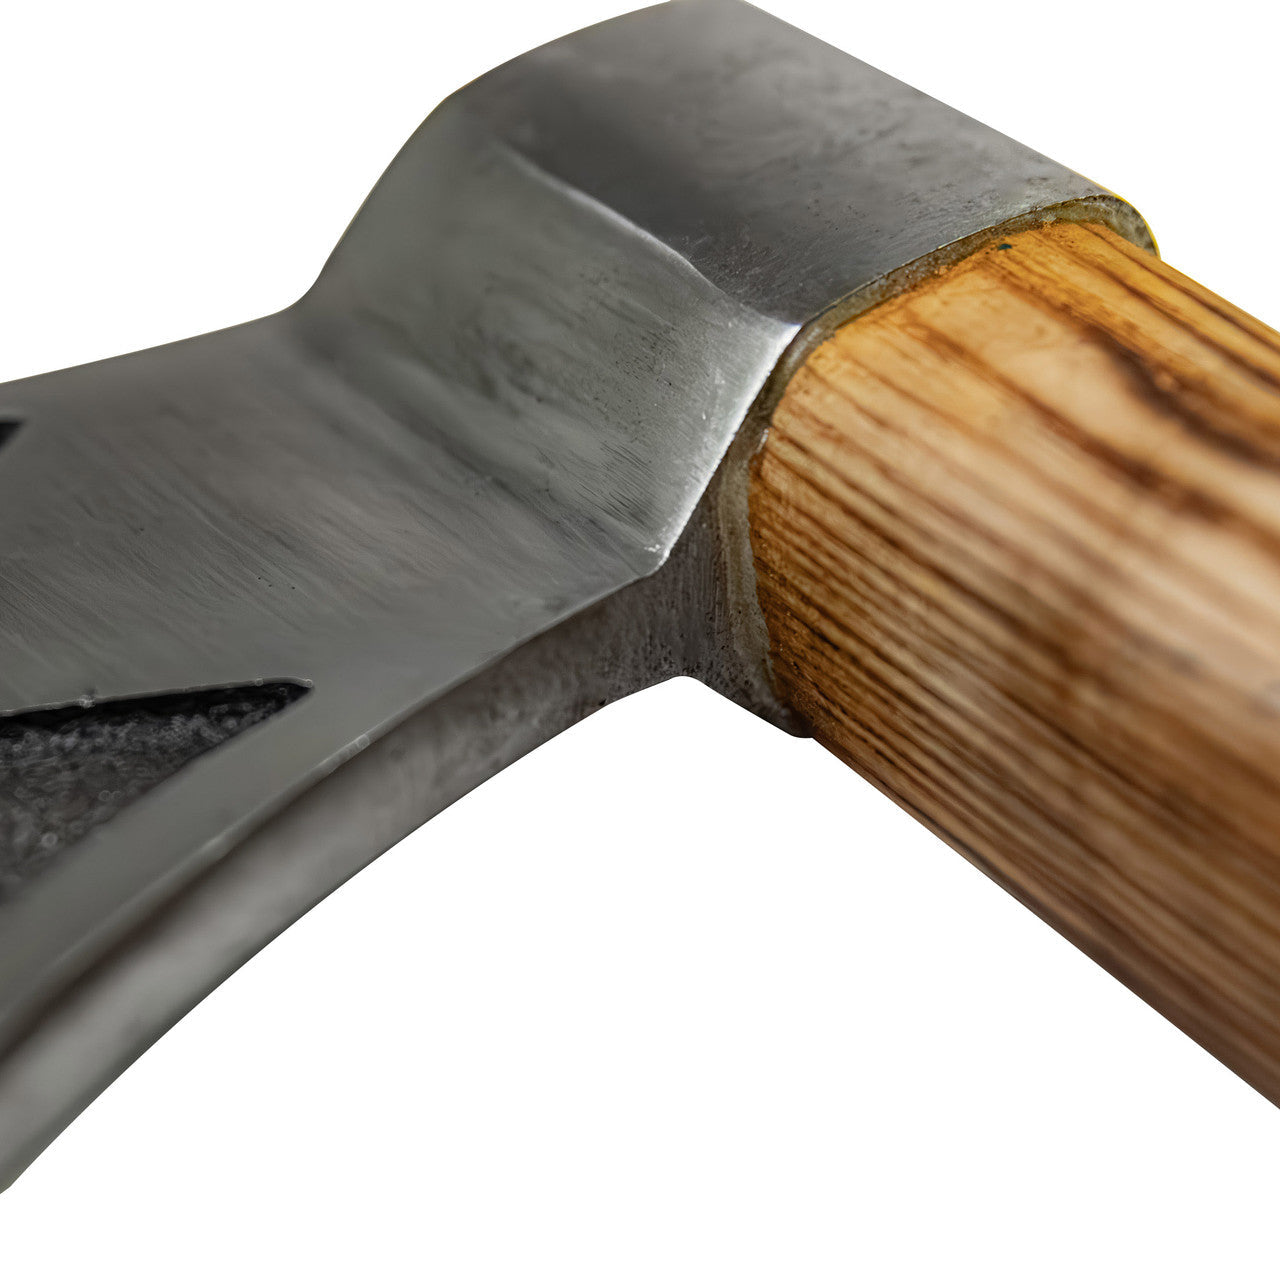 Seven Seas Trident Forge Handcrafted Axe-4